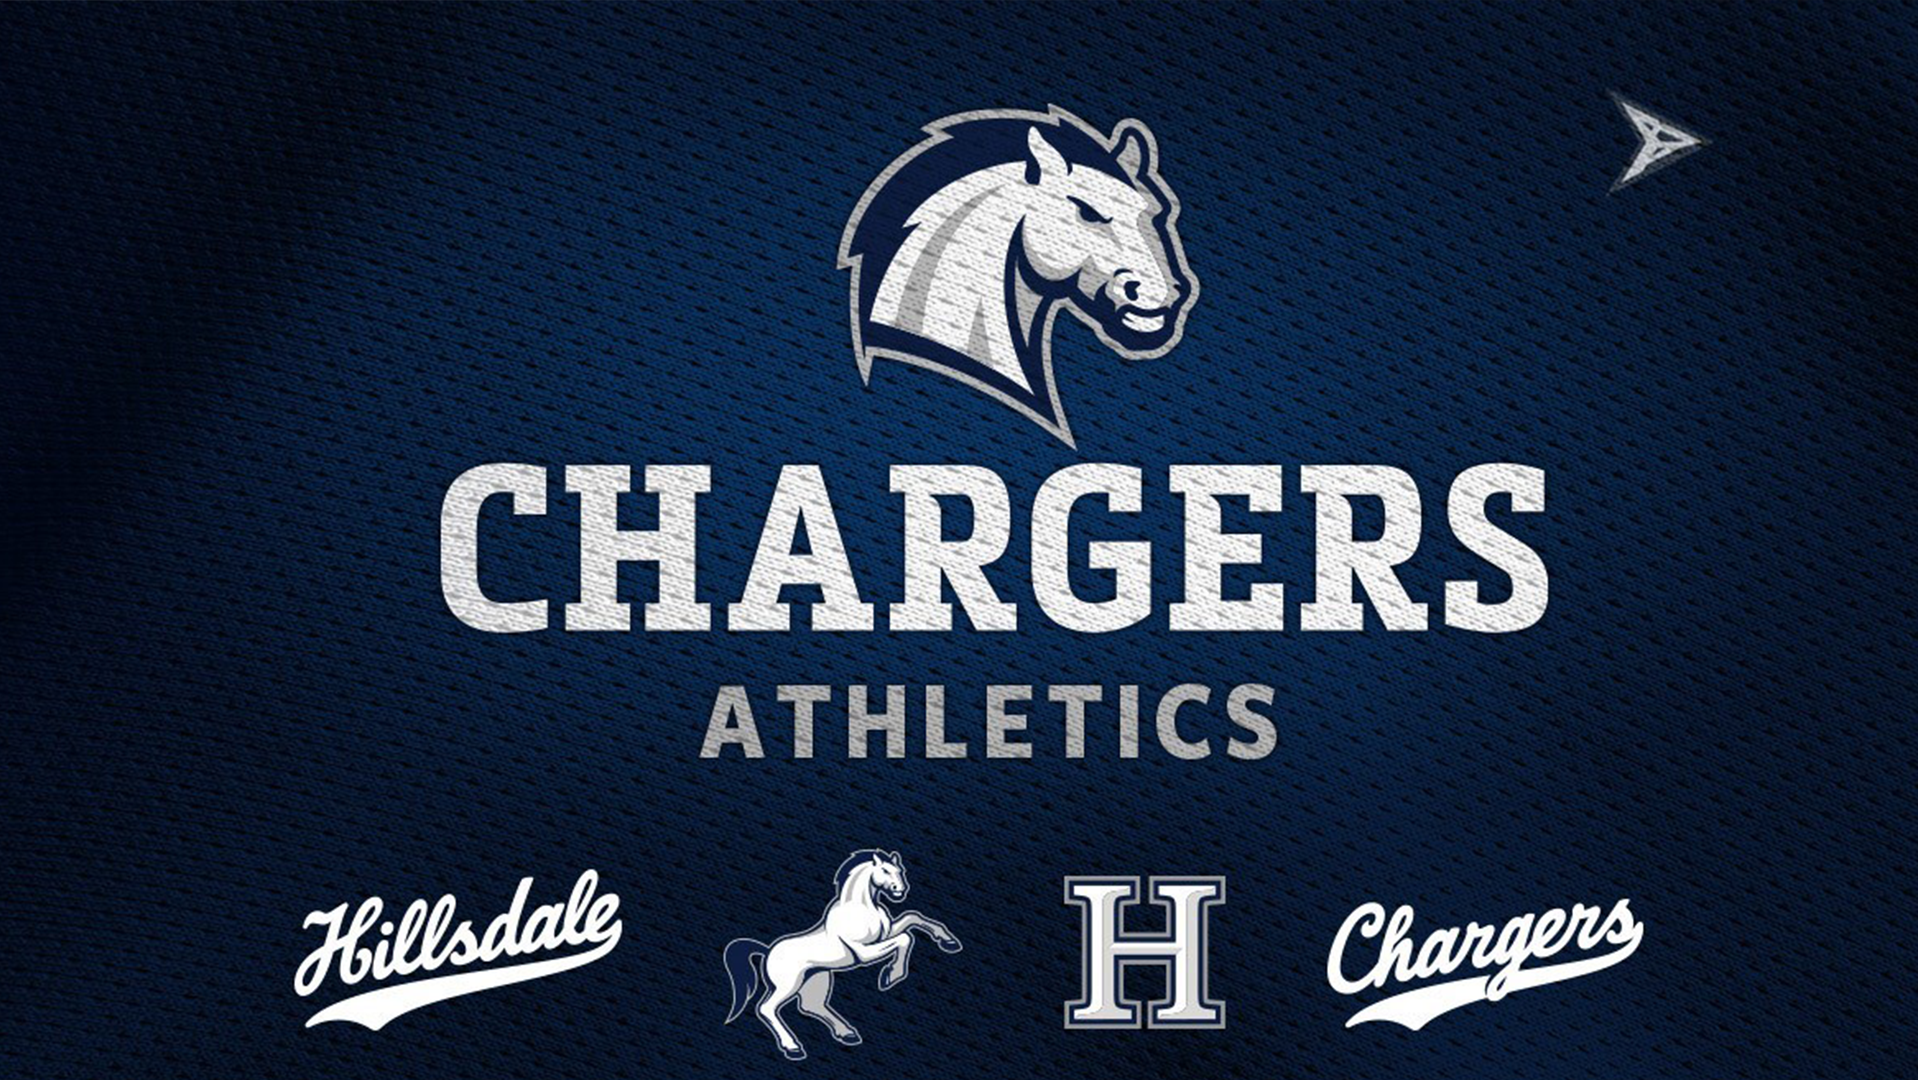 Hillsdale College Athletic Department unveils redesigned logo, partnerships with Ripon Athletic and BSN SPORTS